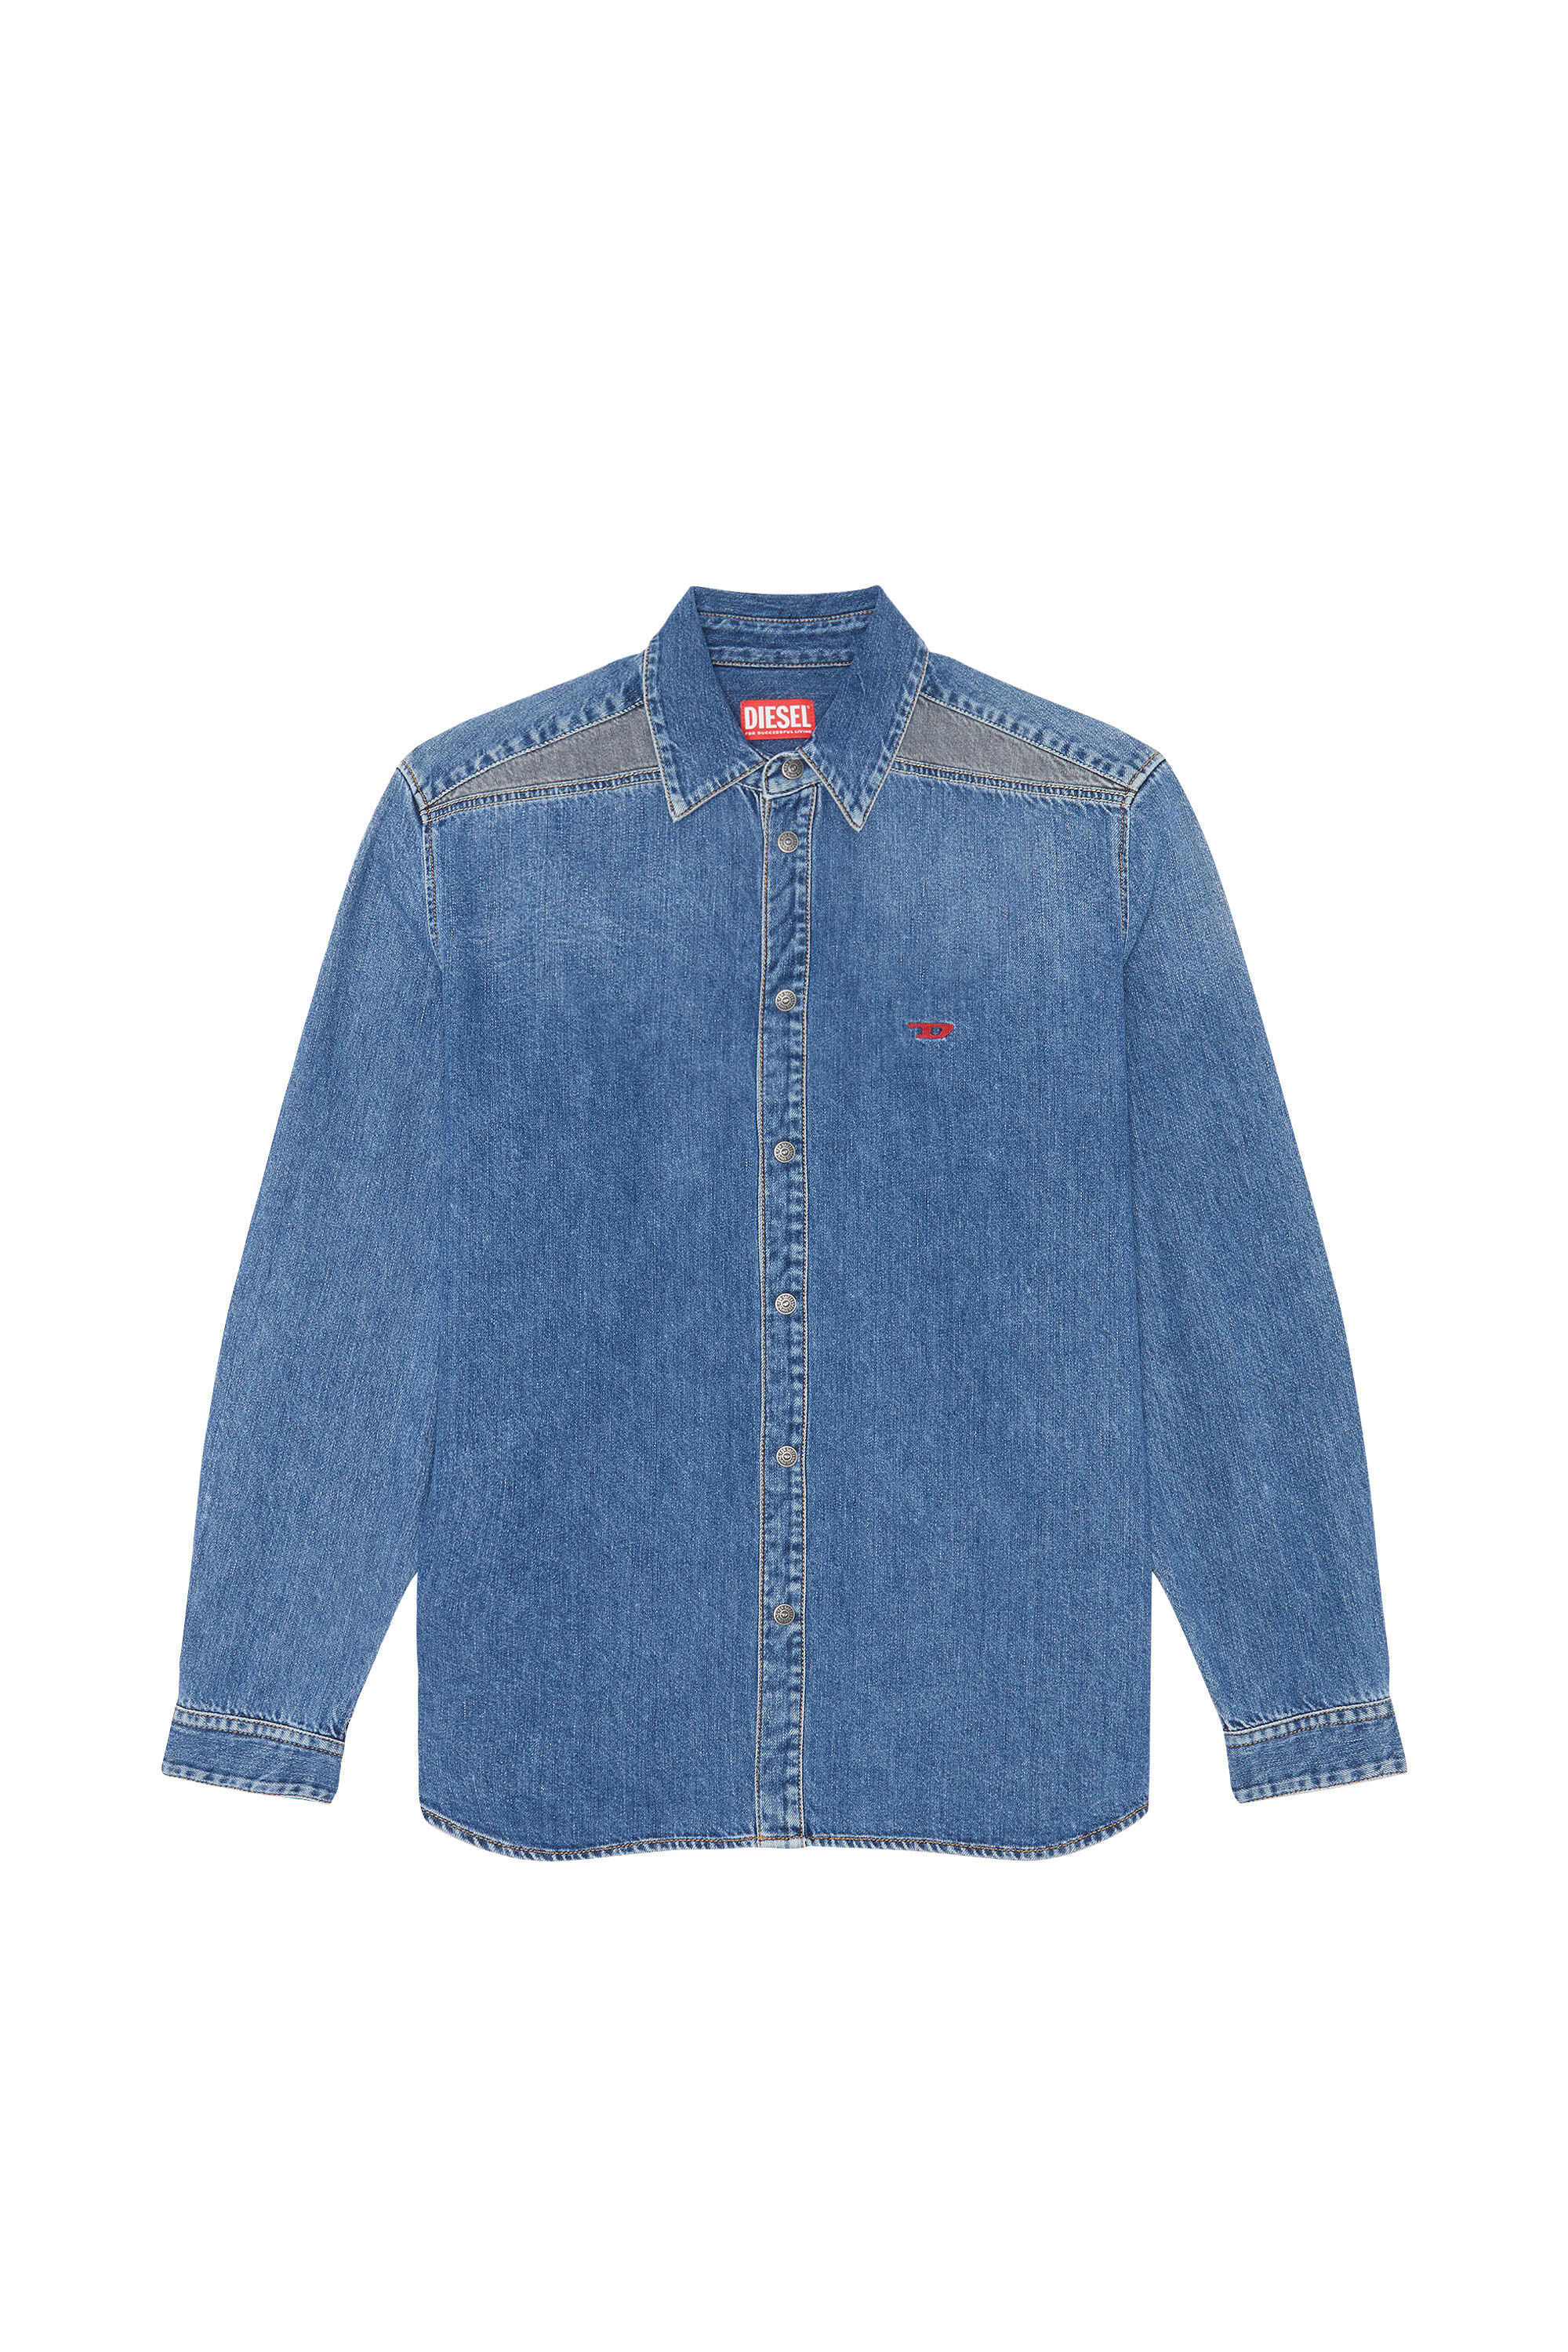 Diesel - D-SIMPLY-RS, Man Denim shirt with contrast inserts in Blue - Image 2